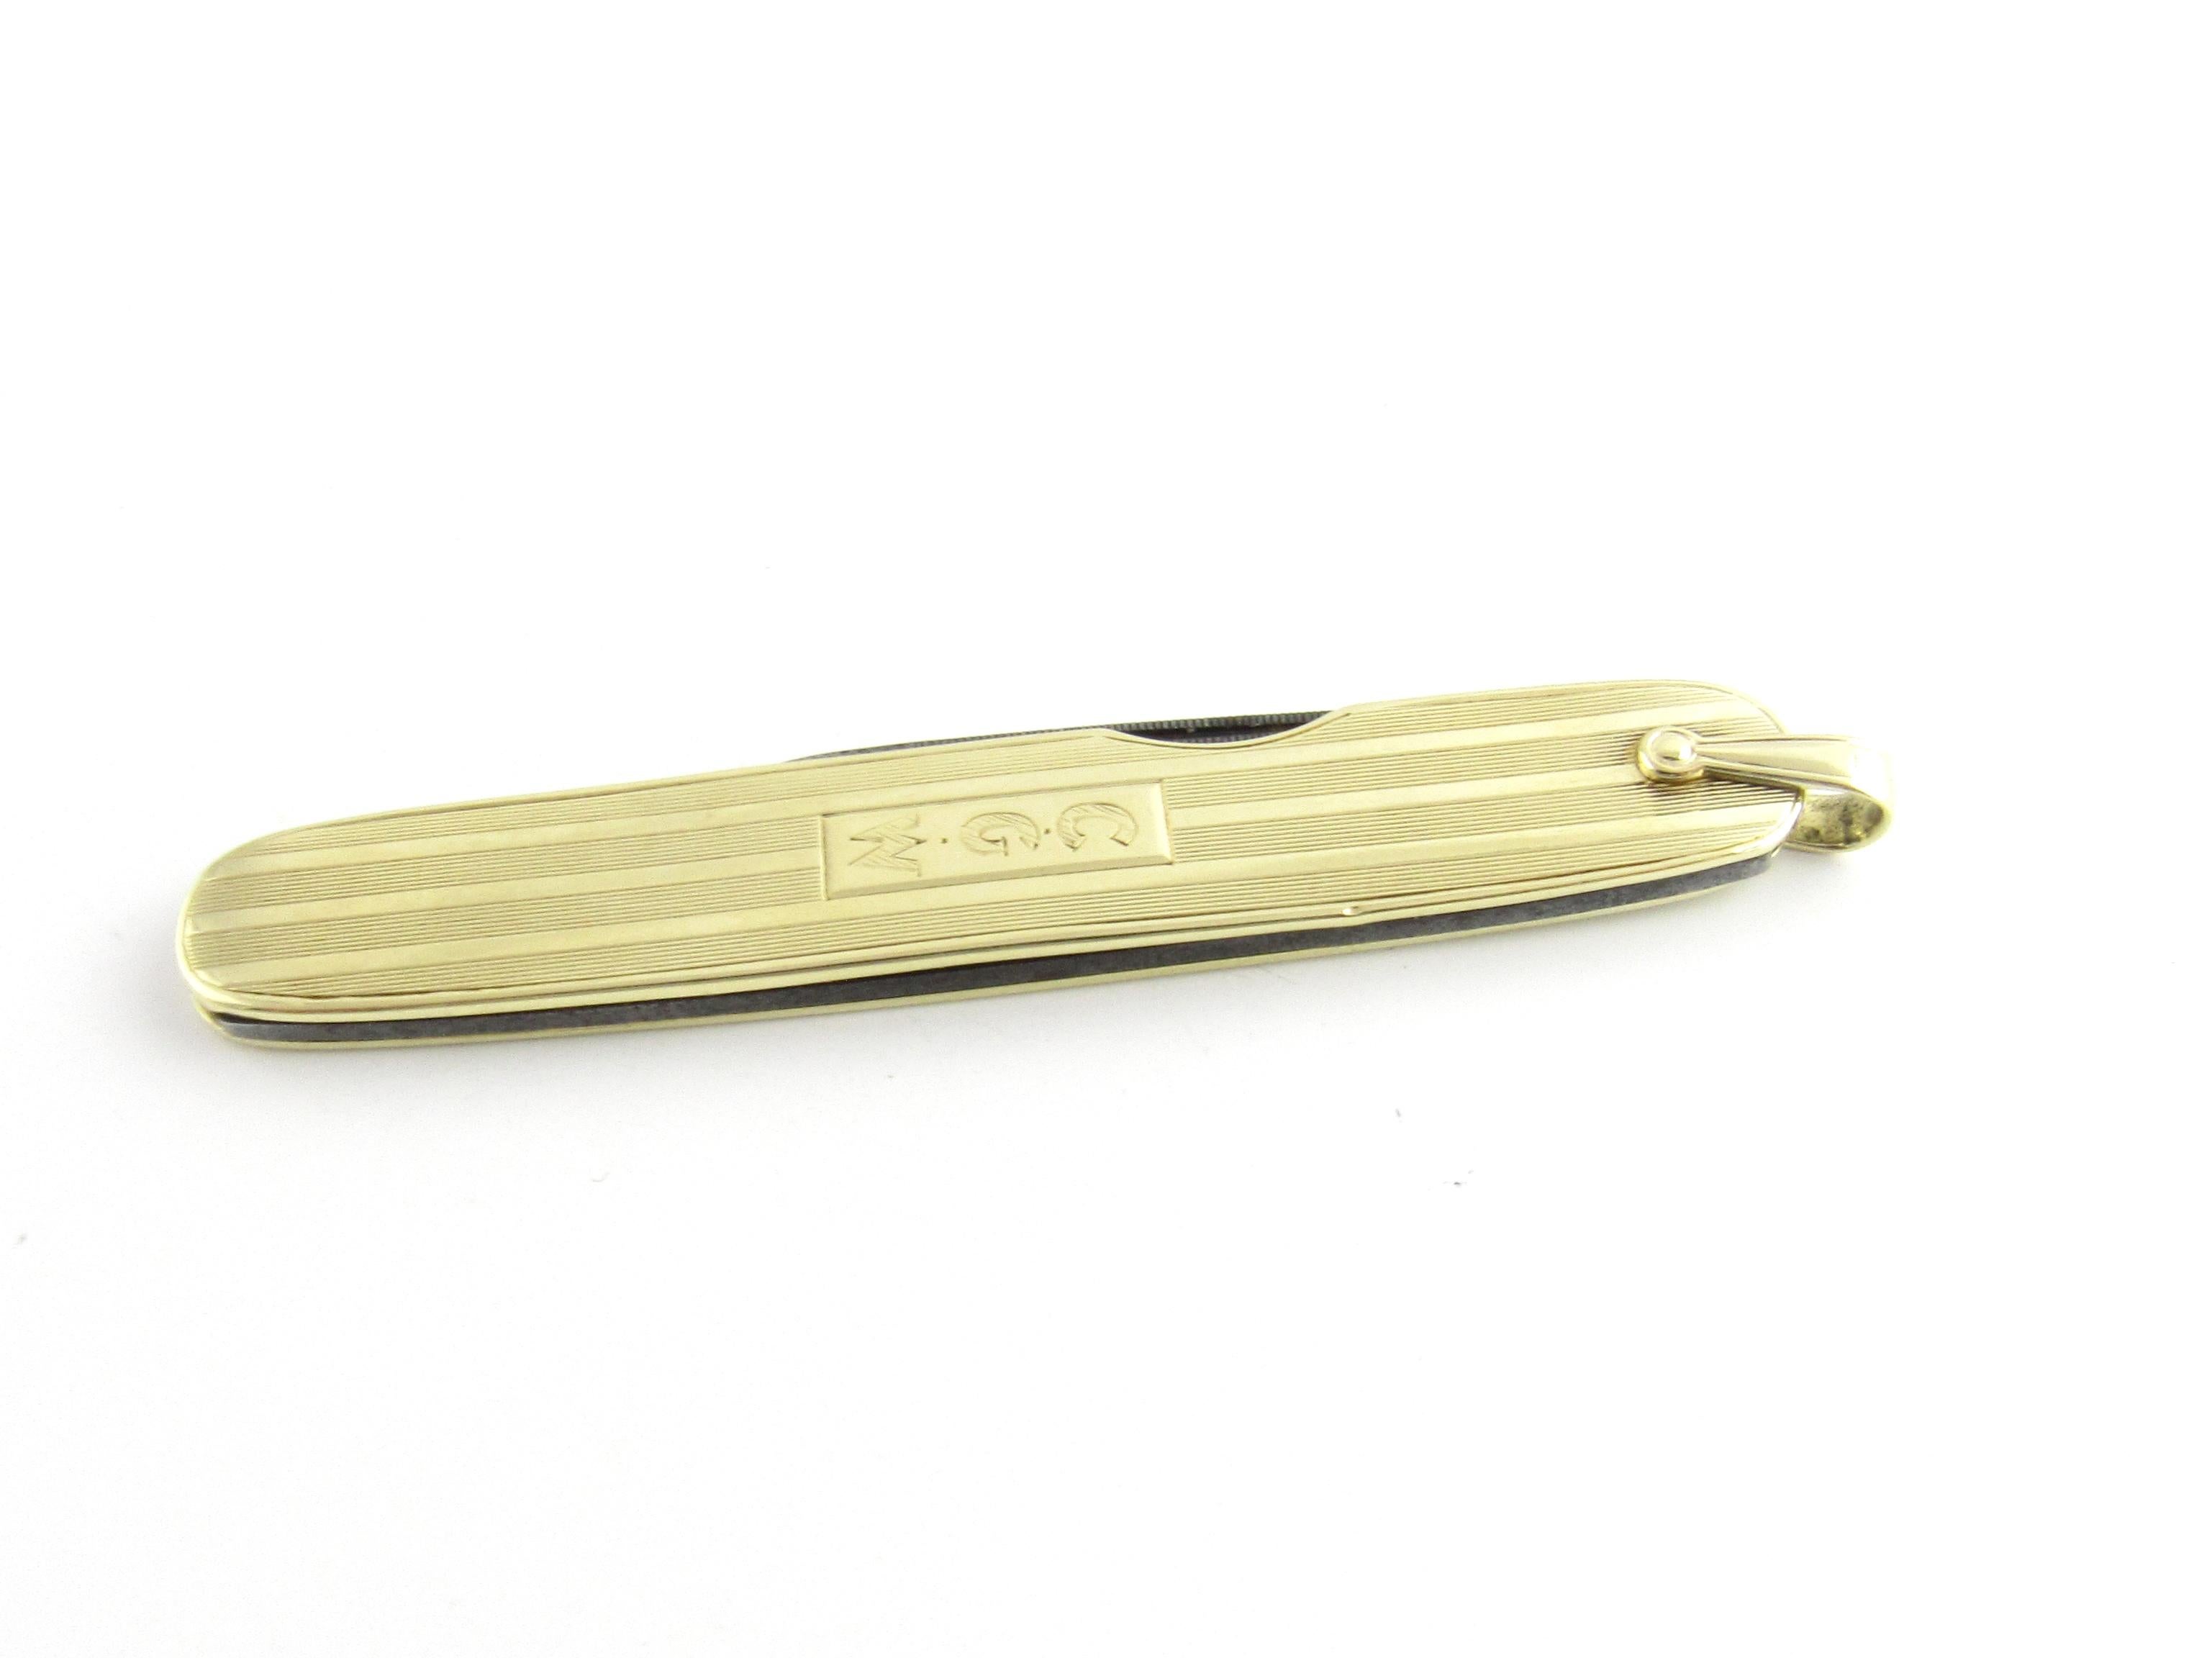 Vintage 14 Karat Yellow Gold Pocket Knife

This elegant pocket knife features a stainless steel blade house in a 14K yellow gold case with polished bar with monogram. Monogram can be removed upon request.

Size: 67 mm x 12 mm

Weight: 9.3 dwt. /